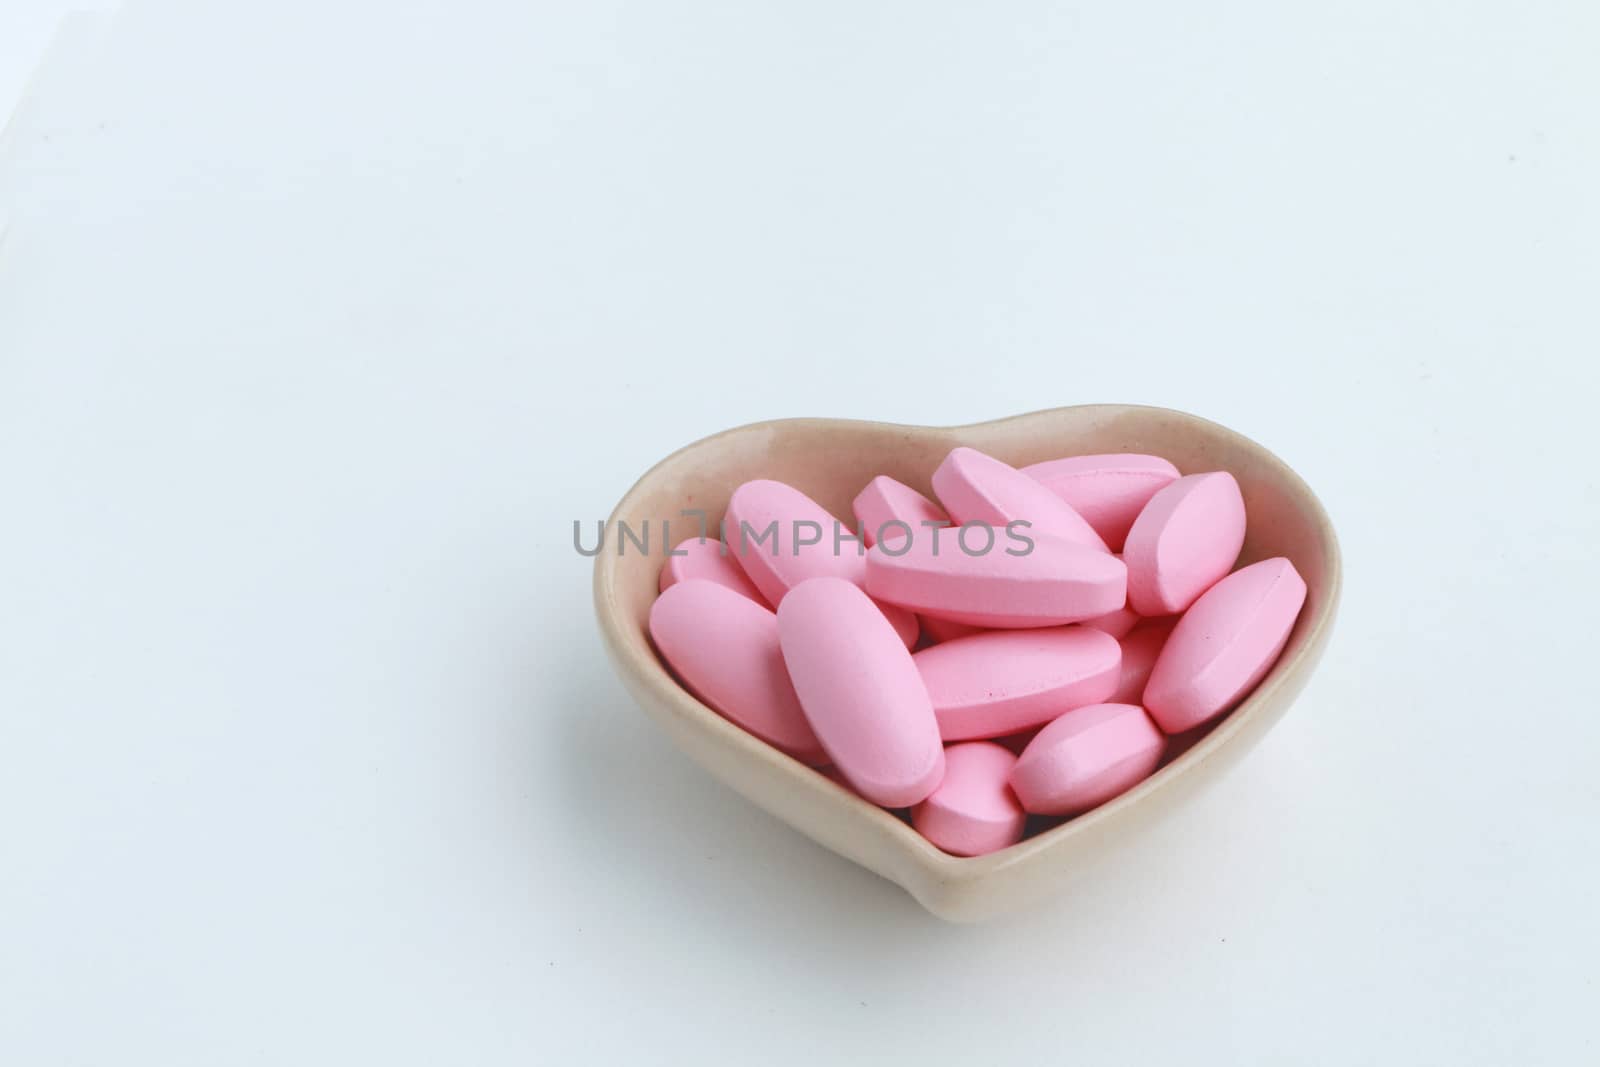 Many pink oval pills in the ceramic cup shape of heart.